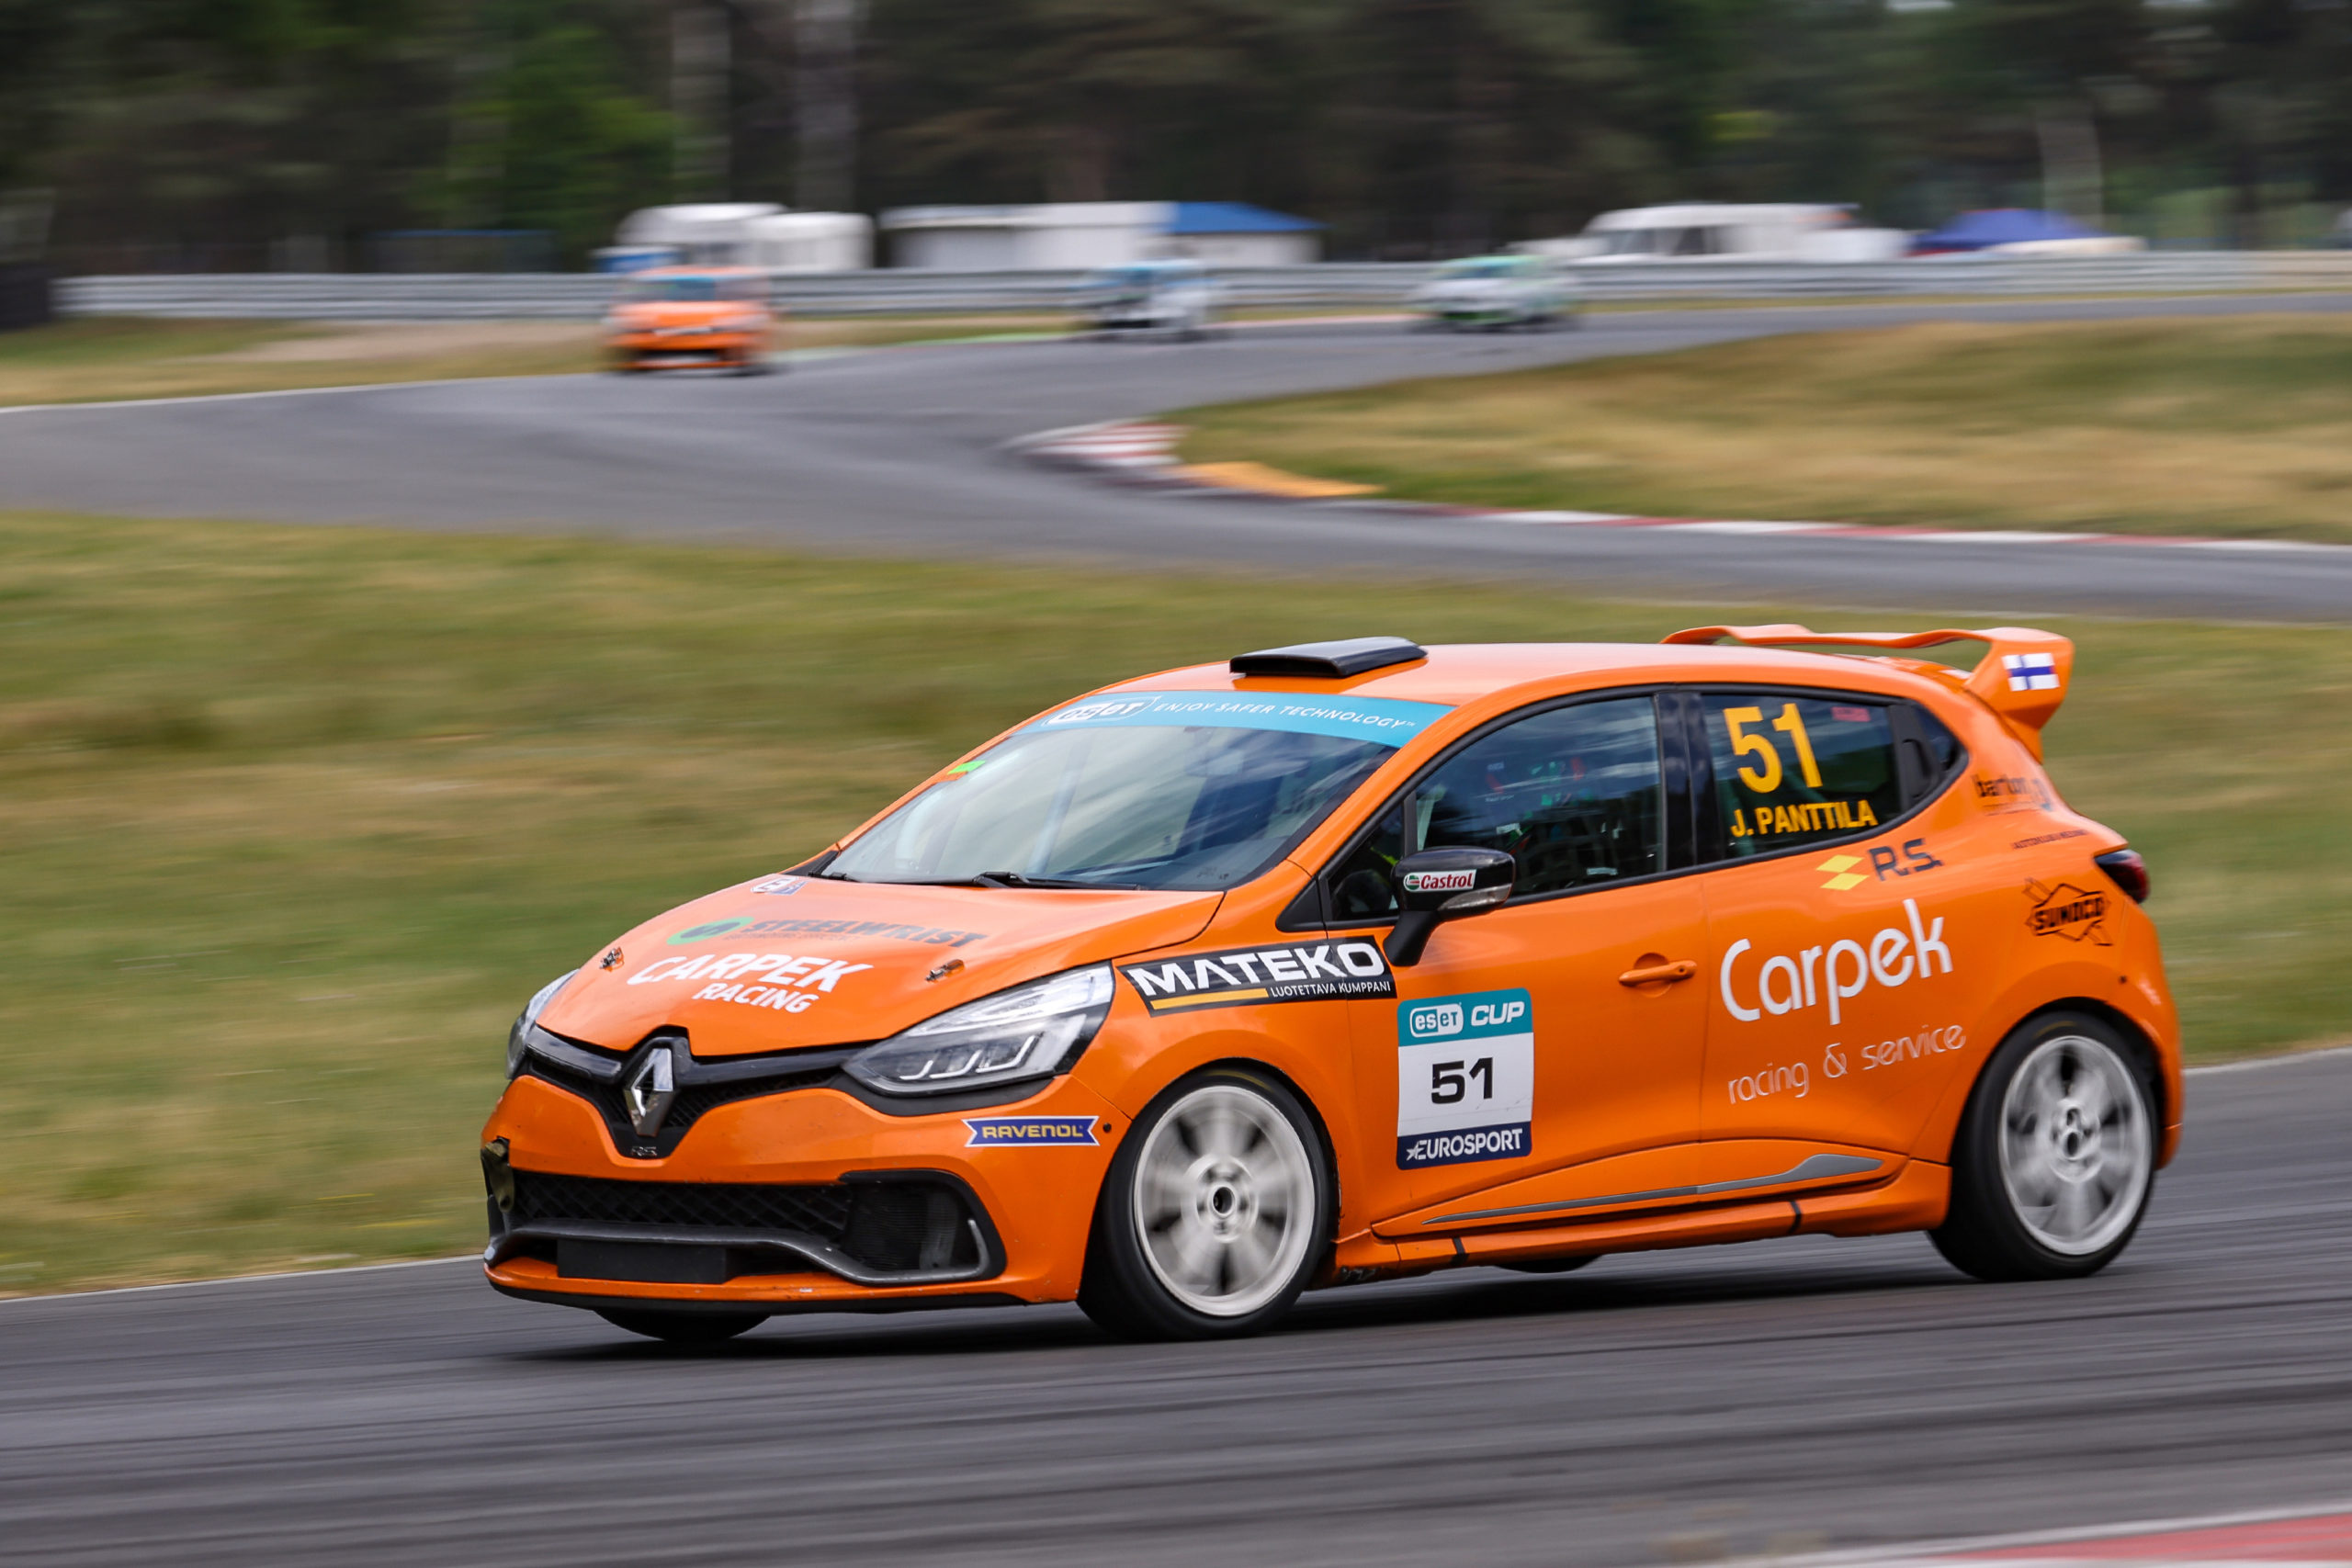 Panttila takes his first win in a thrilling Clio Cup Bohemia race